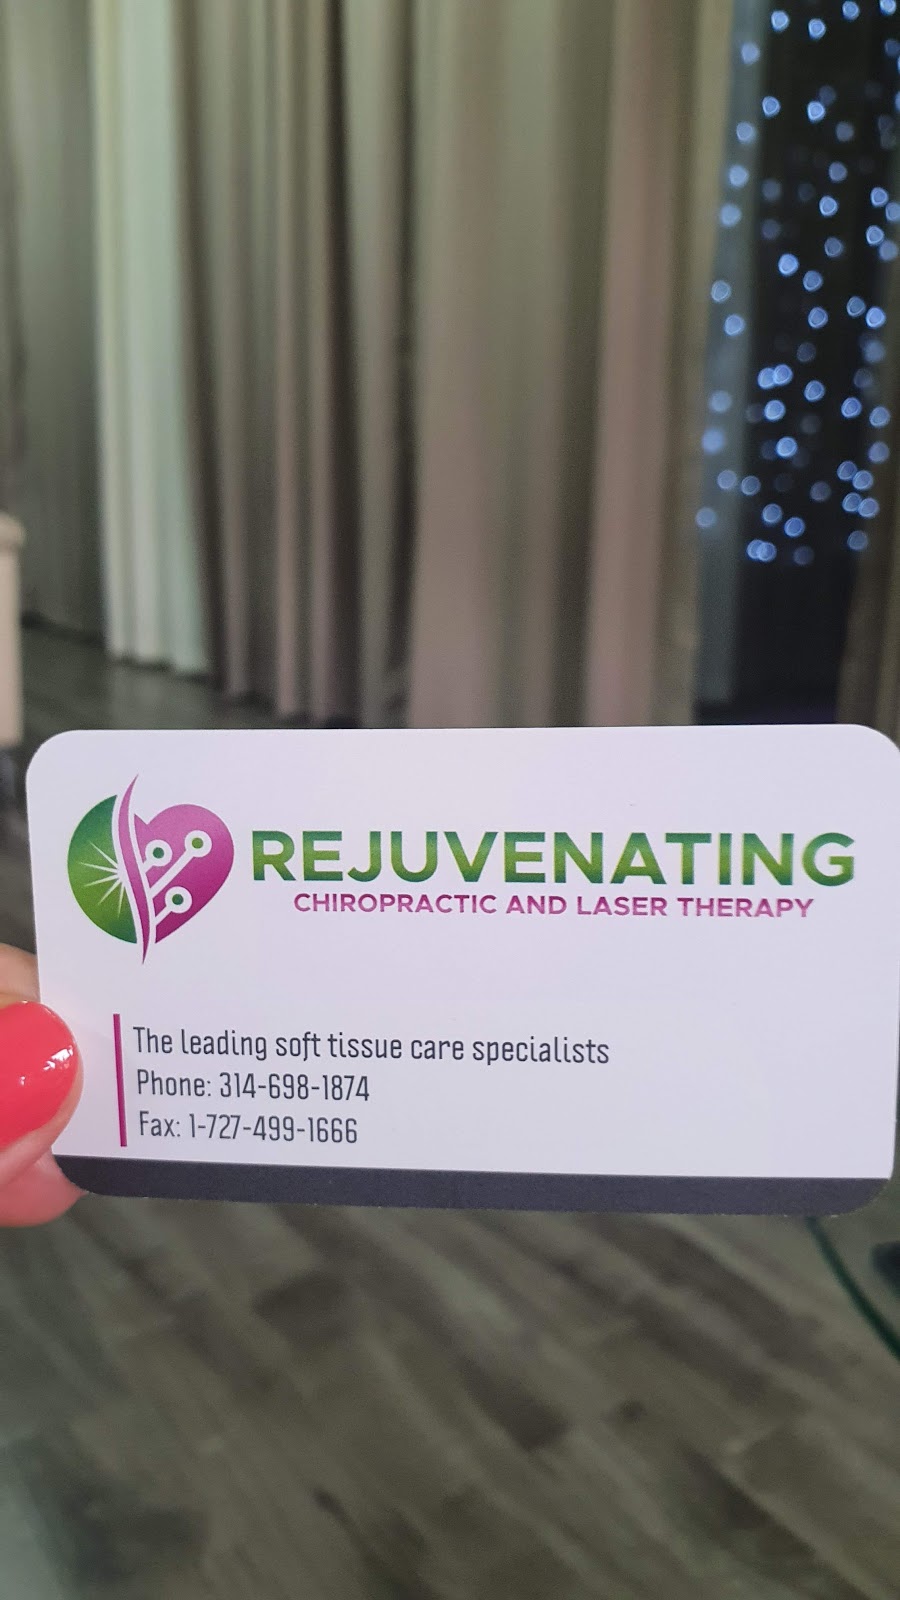 Rejuvenating Chiropractic and Laser Therapy LLC | 11733 N Dale Mabry Hwy, Tampa, FL 33618, USA | Phone: (314) 698-1874